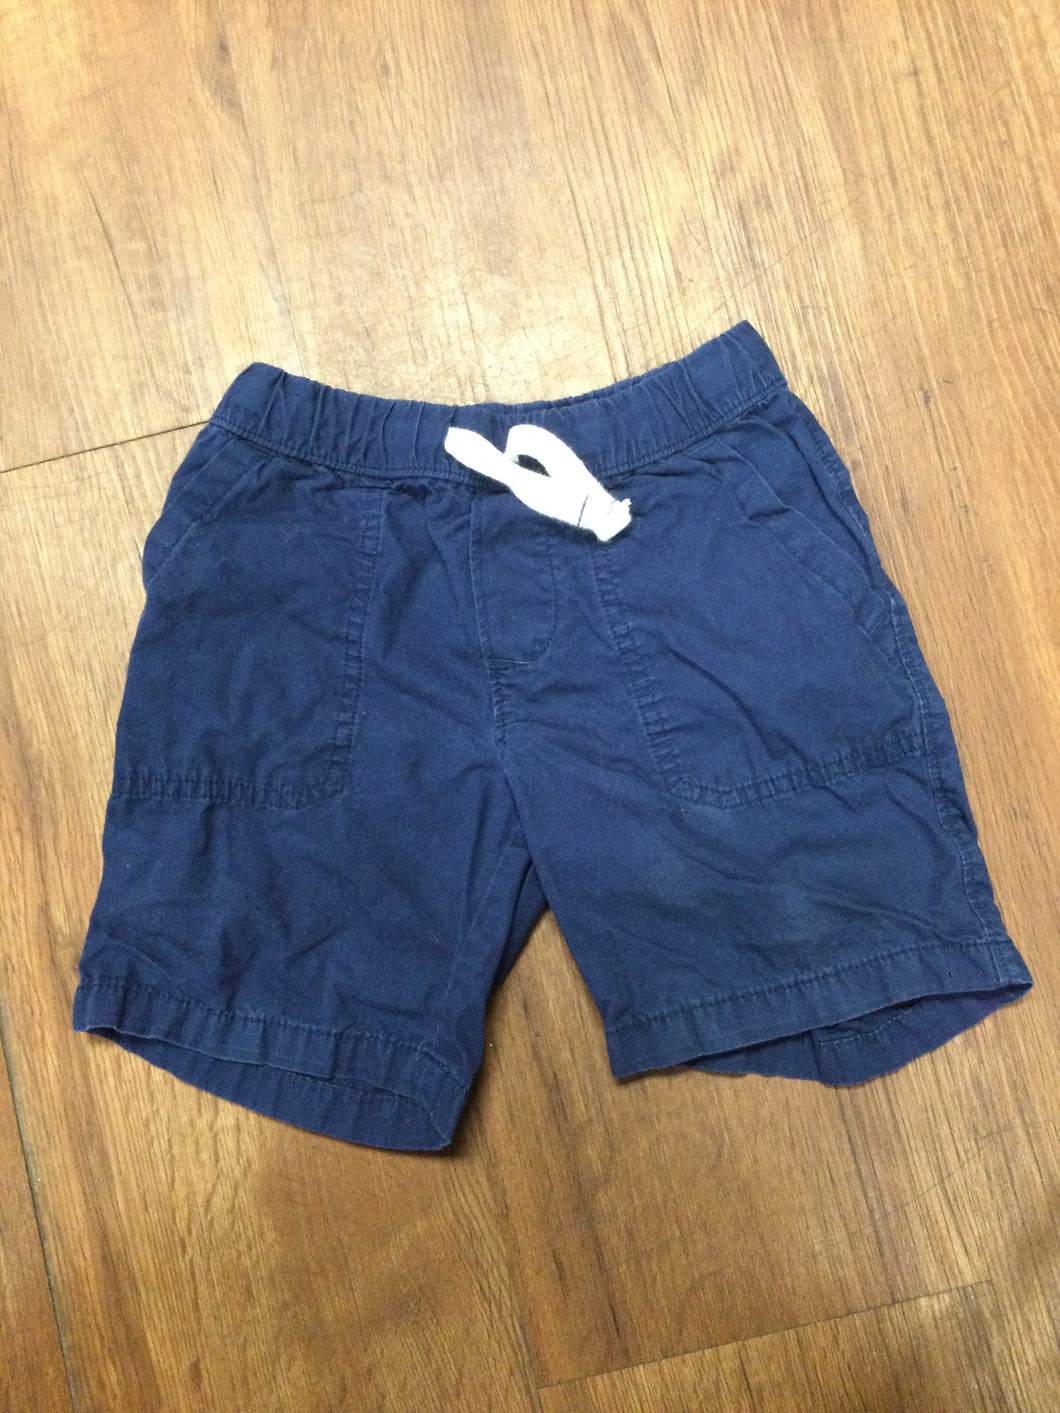 Boy's Size 3T Carters Shorts